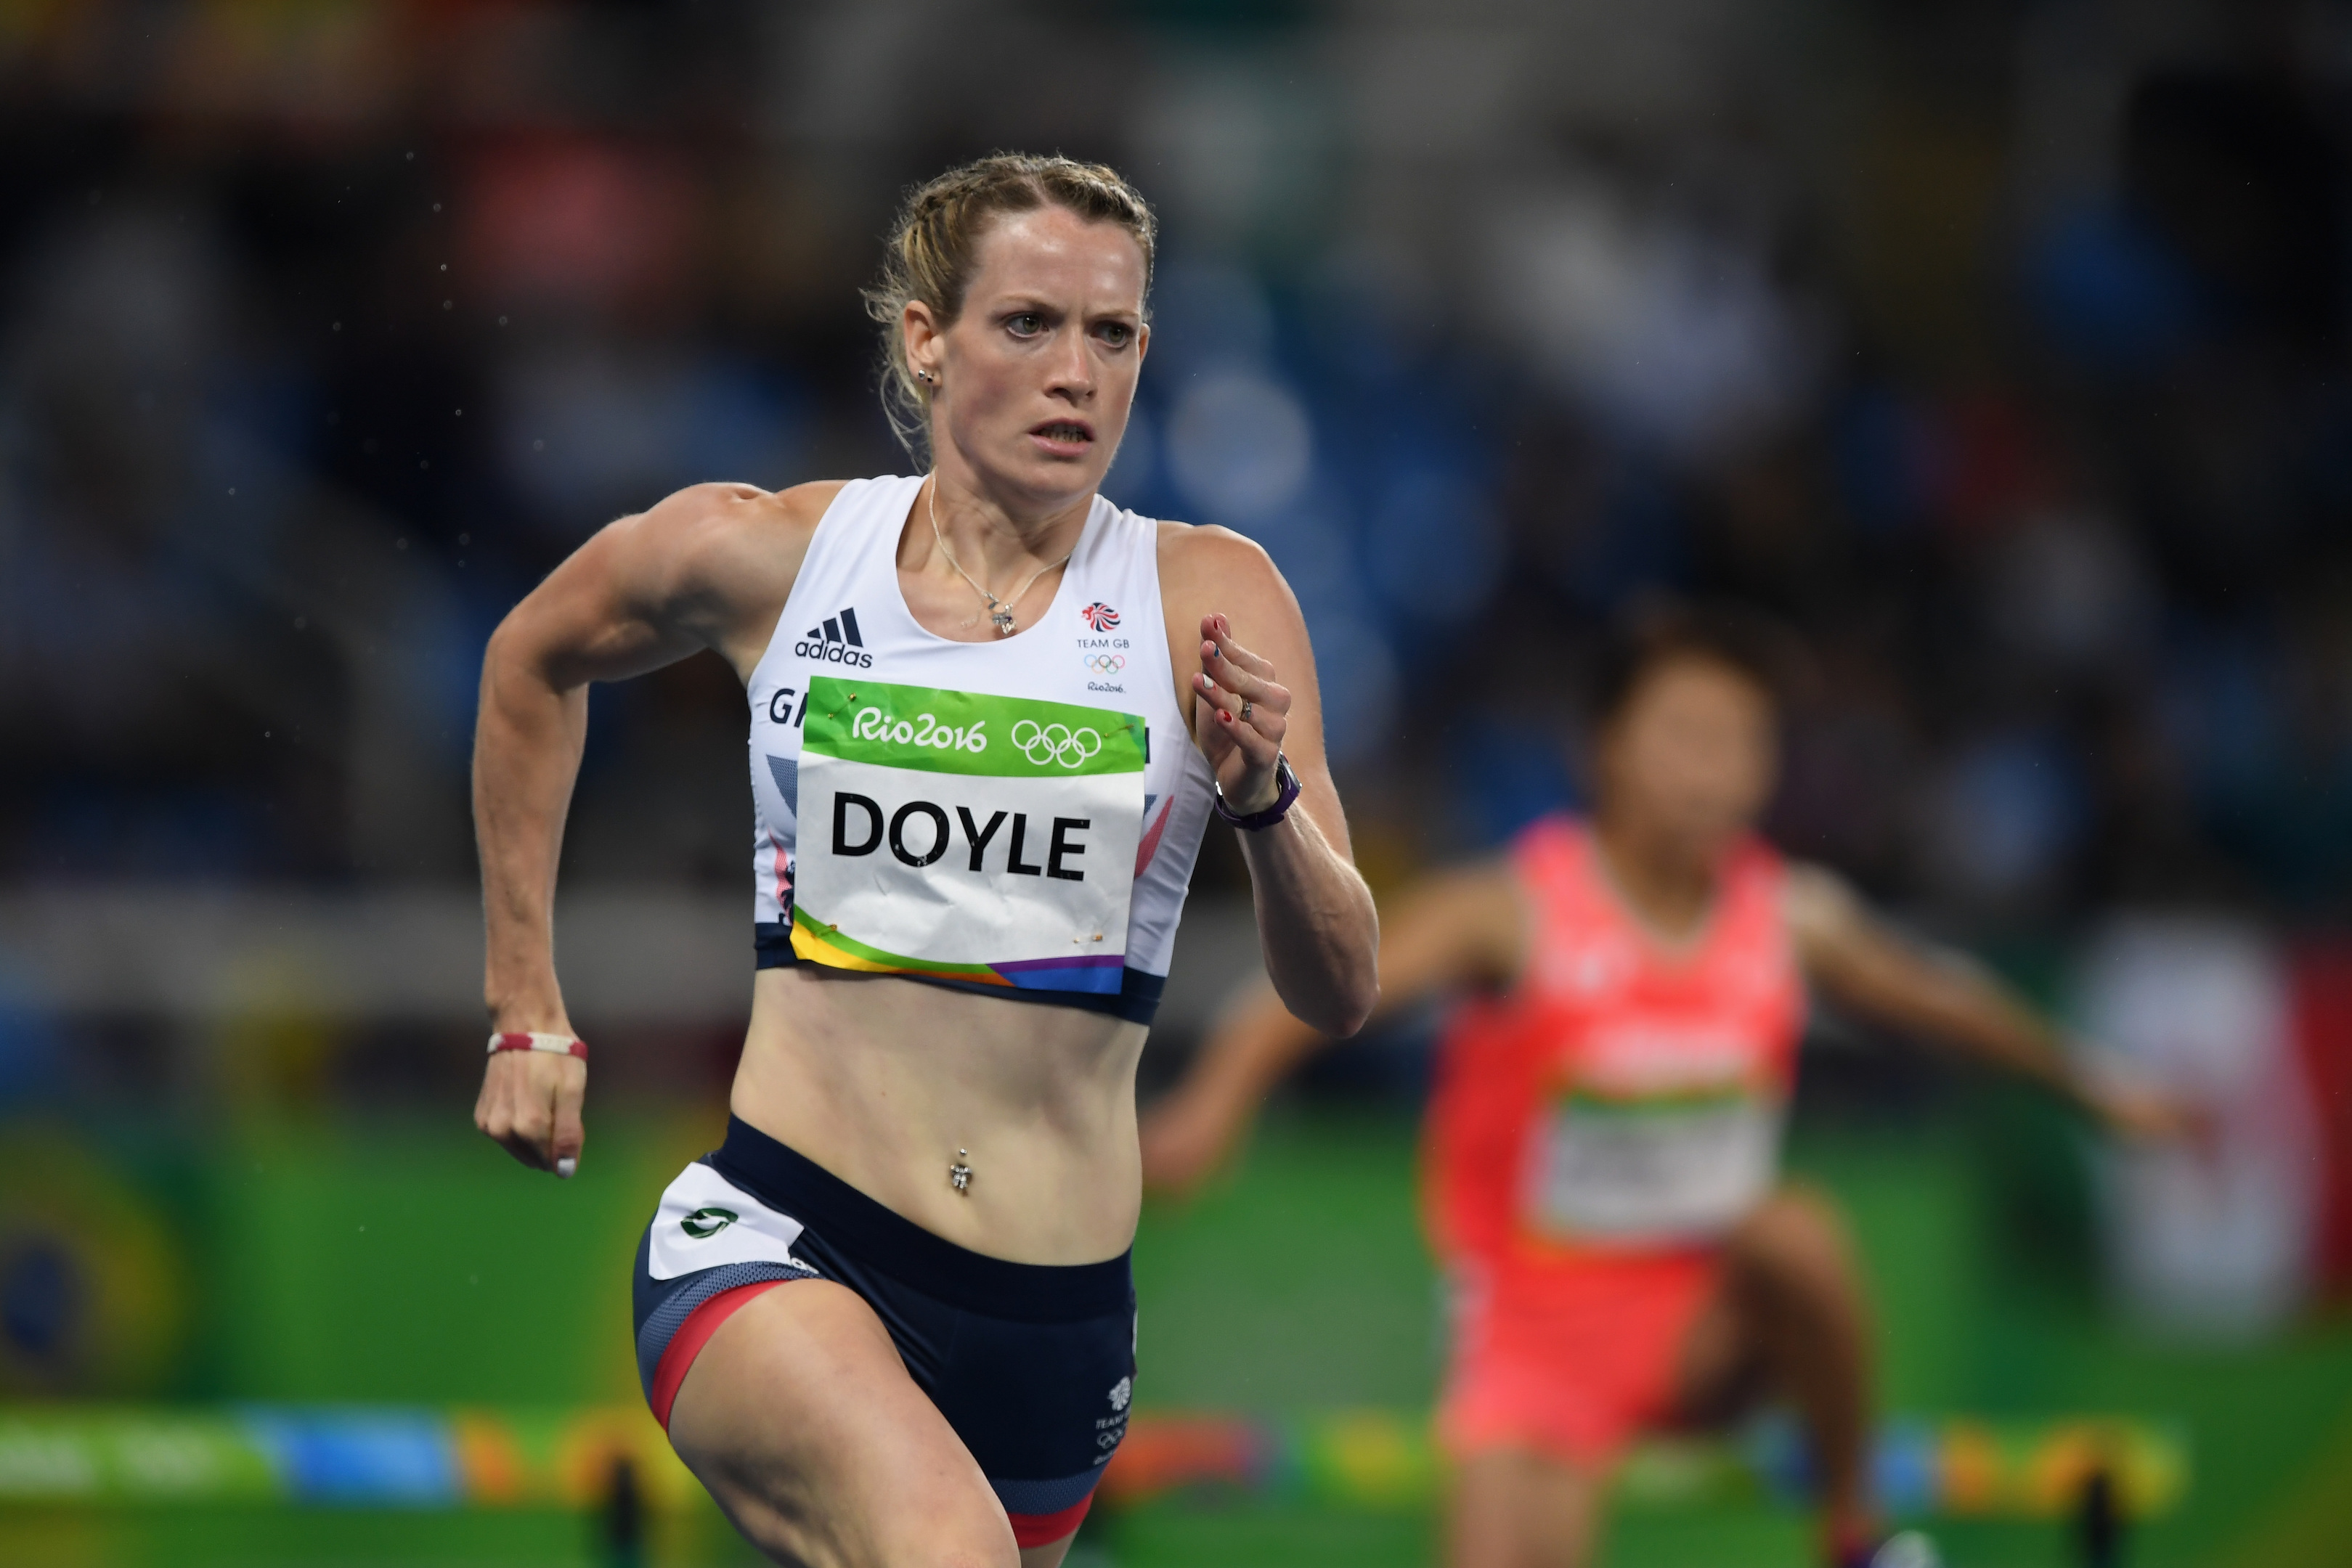 Eilidh Doyle in action at last year's Olympics (Shaun Botterill/Getty Images)